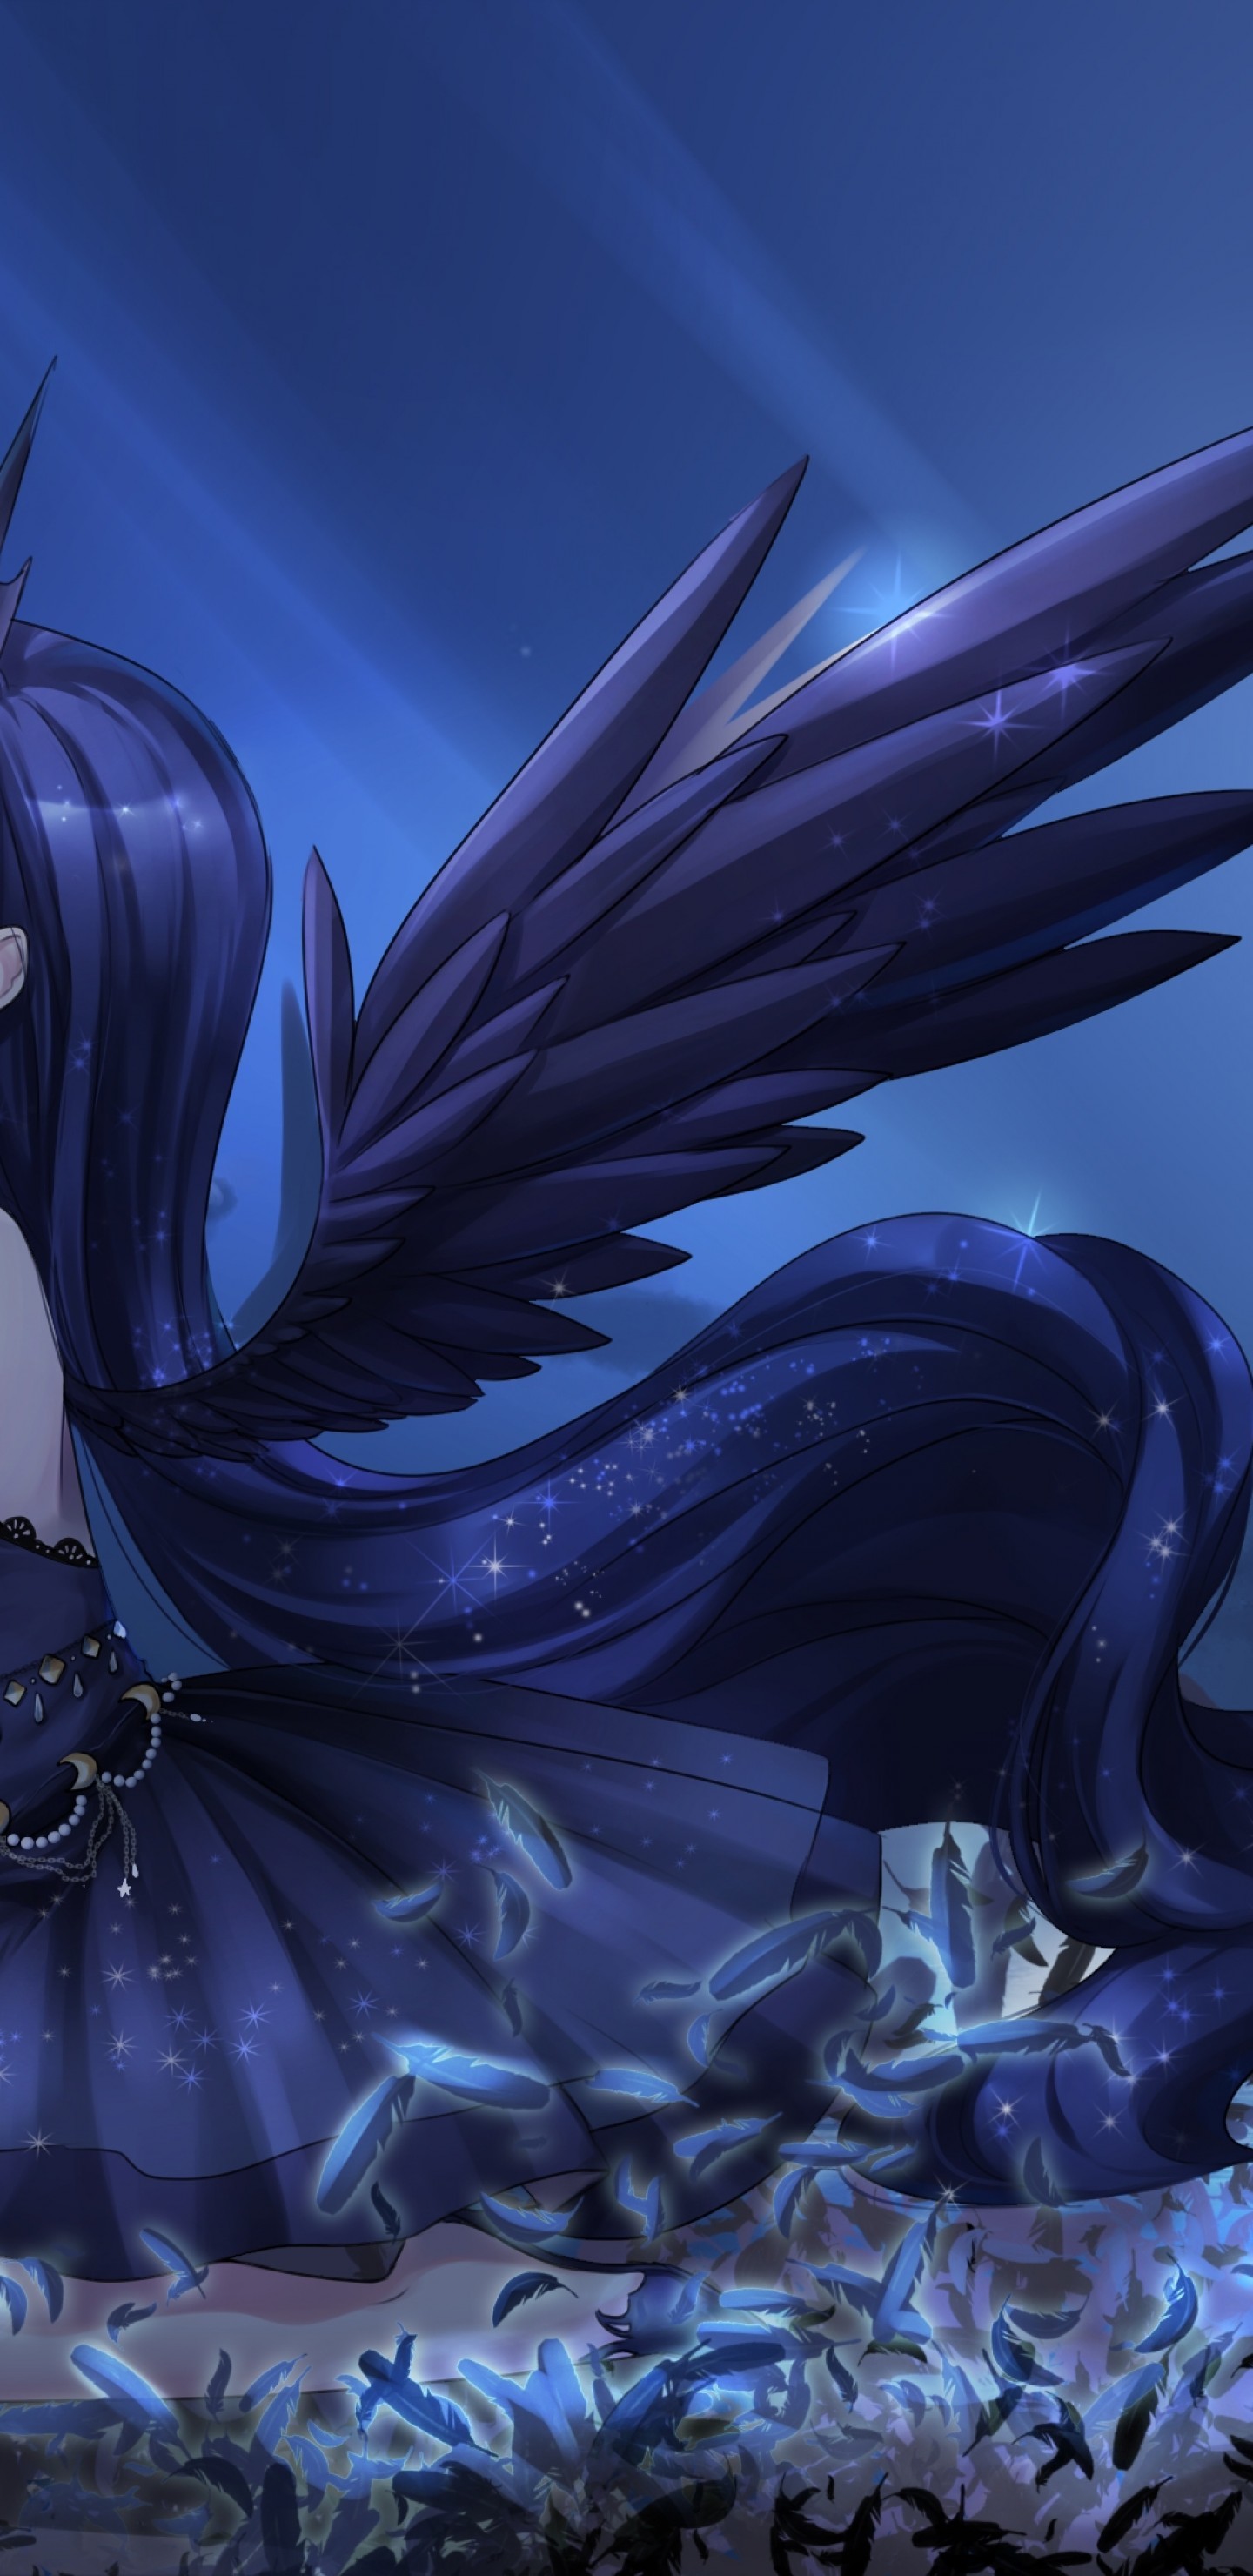 1440x2960 Princess Luna, My Little Pony, Anime Style, Profile View, Wings, Moon